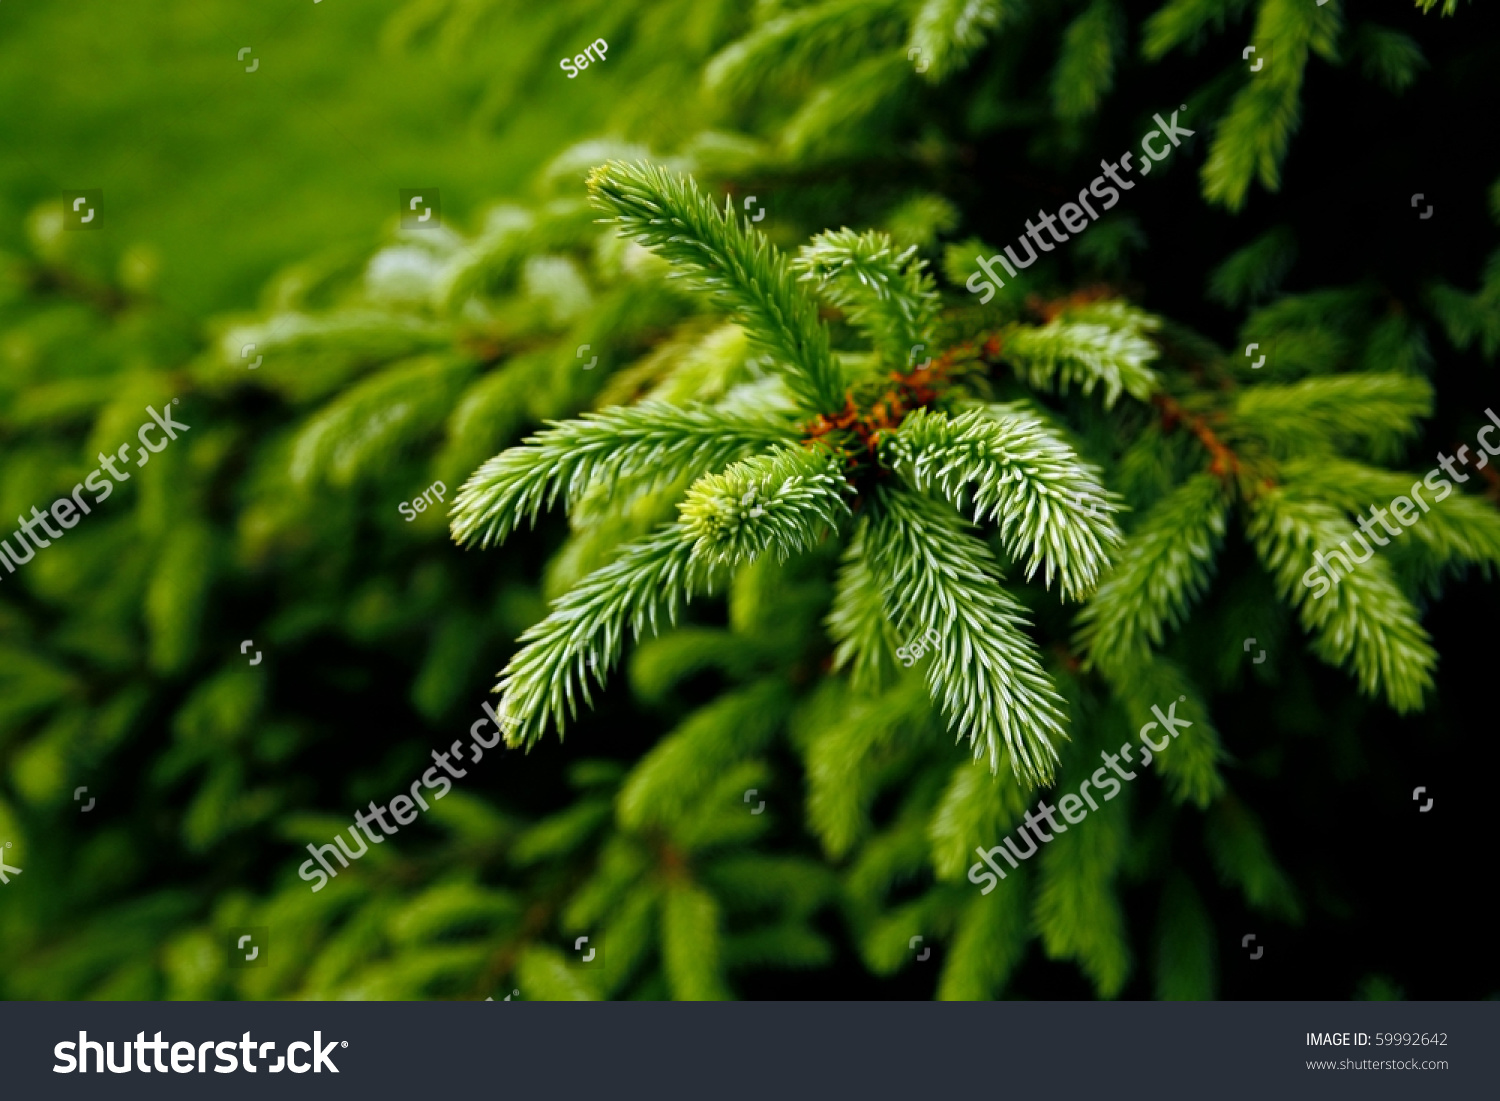 green prickly branches of a fur-tree or pine #59992642